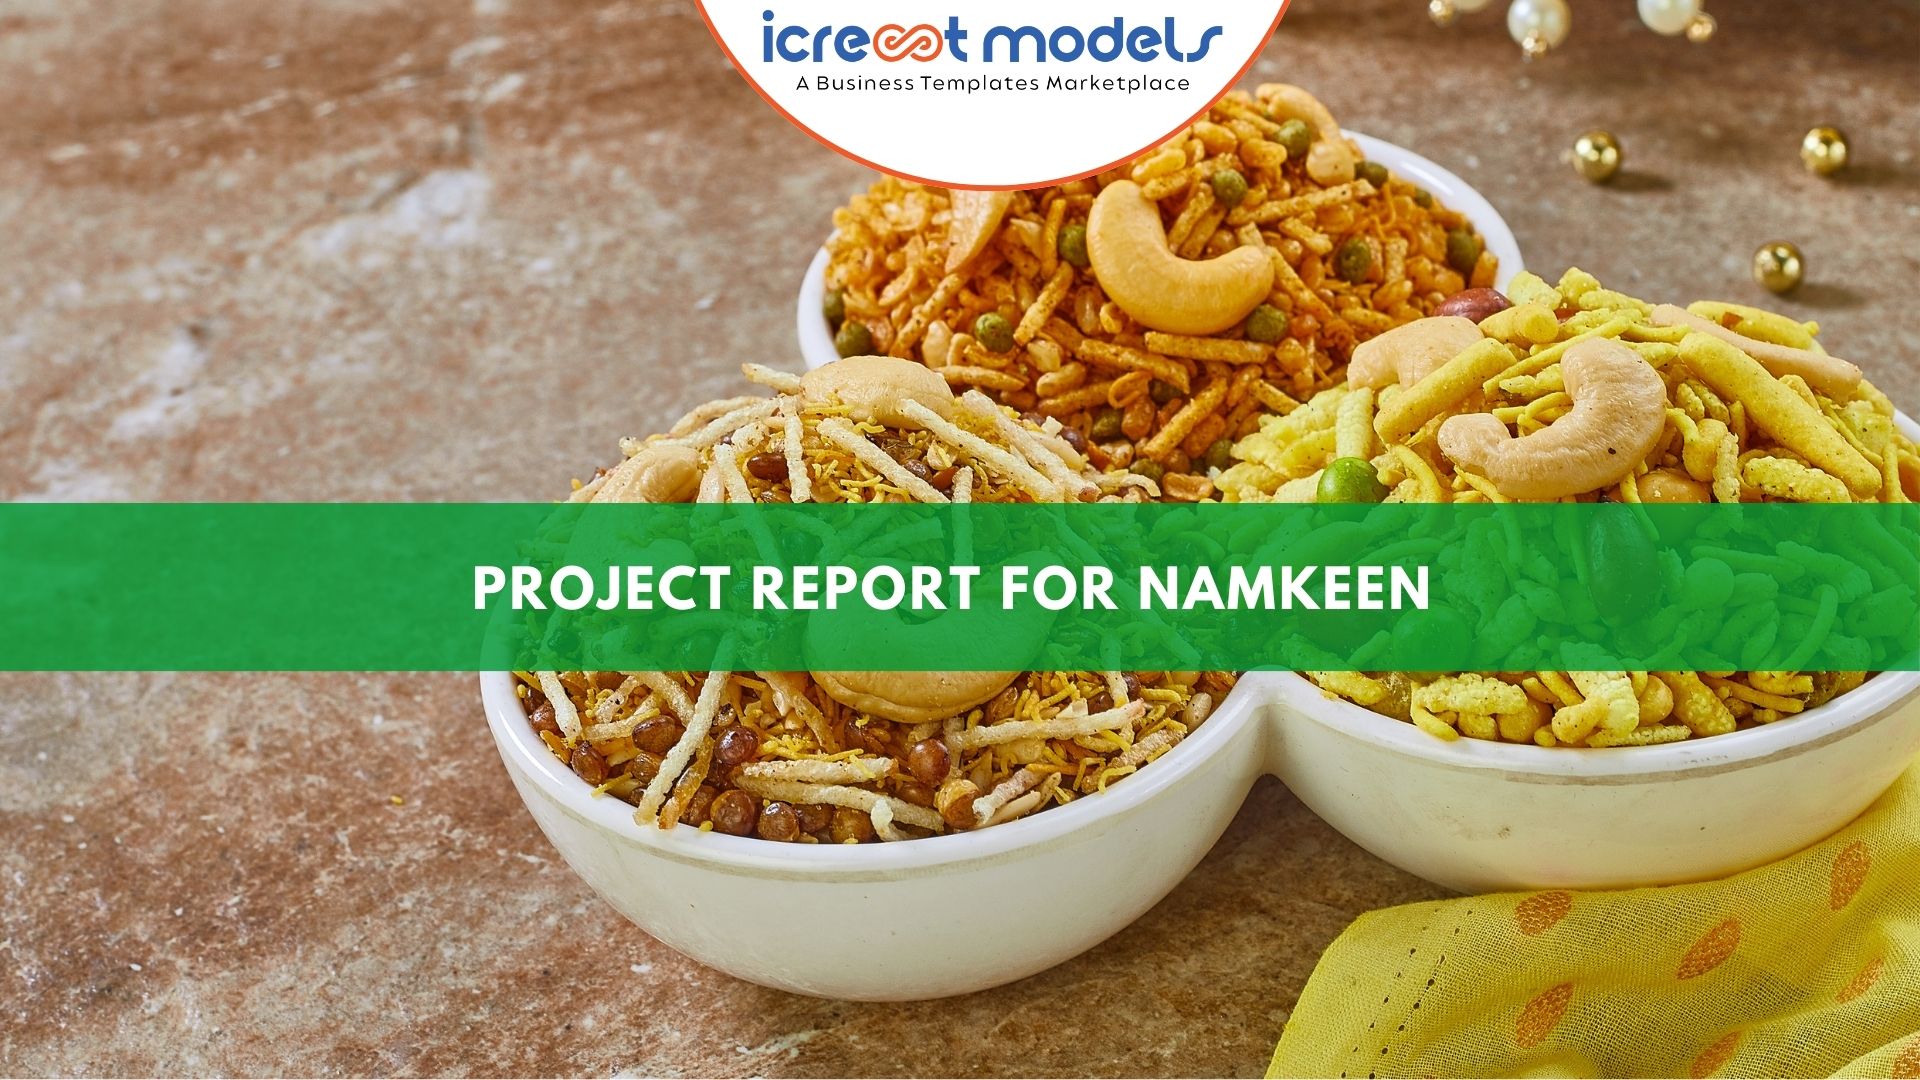 PROJECT REPORT FOR NAMKEEN